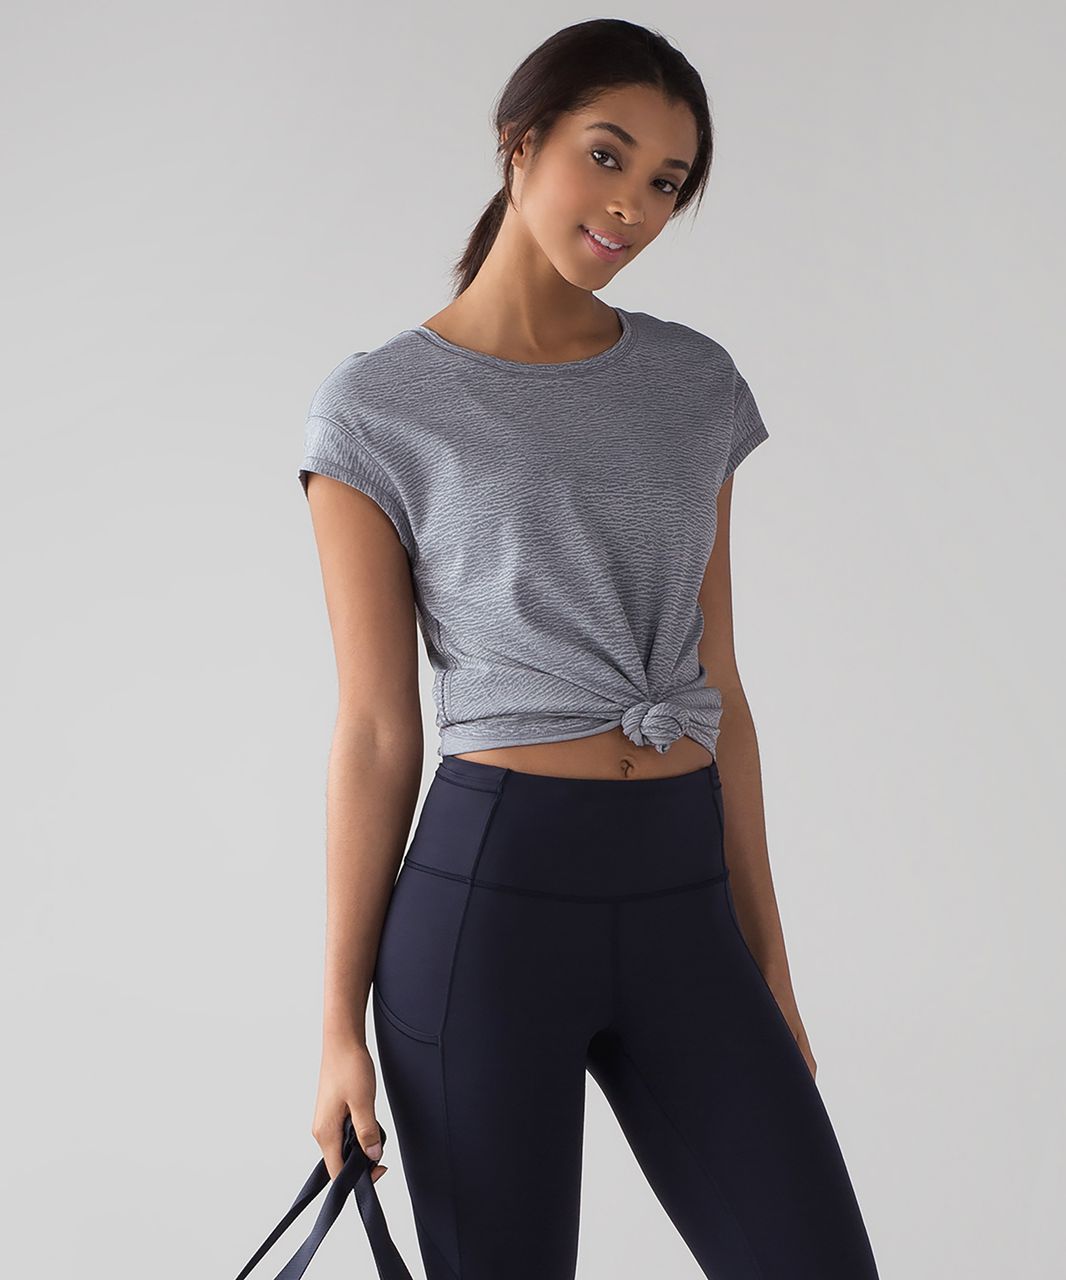 Lululemon Lost In Pace Short Sleeve - Sheer Luon Pebble Jacquard V2 Arctic Grey Ice Grey